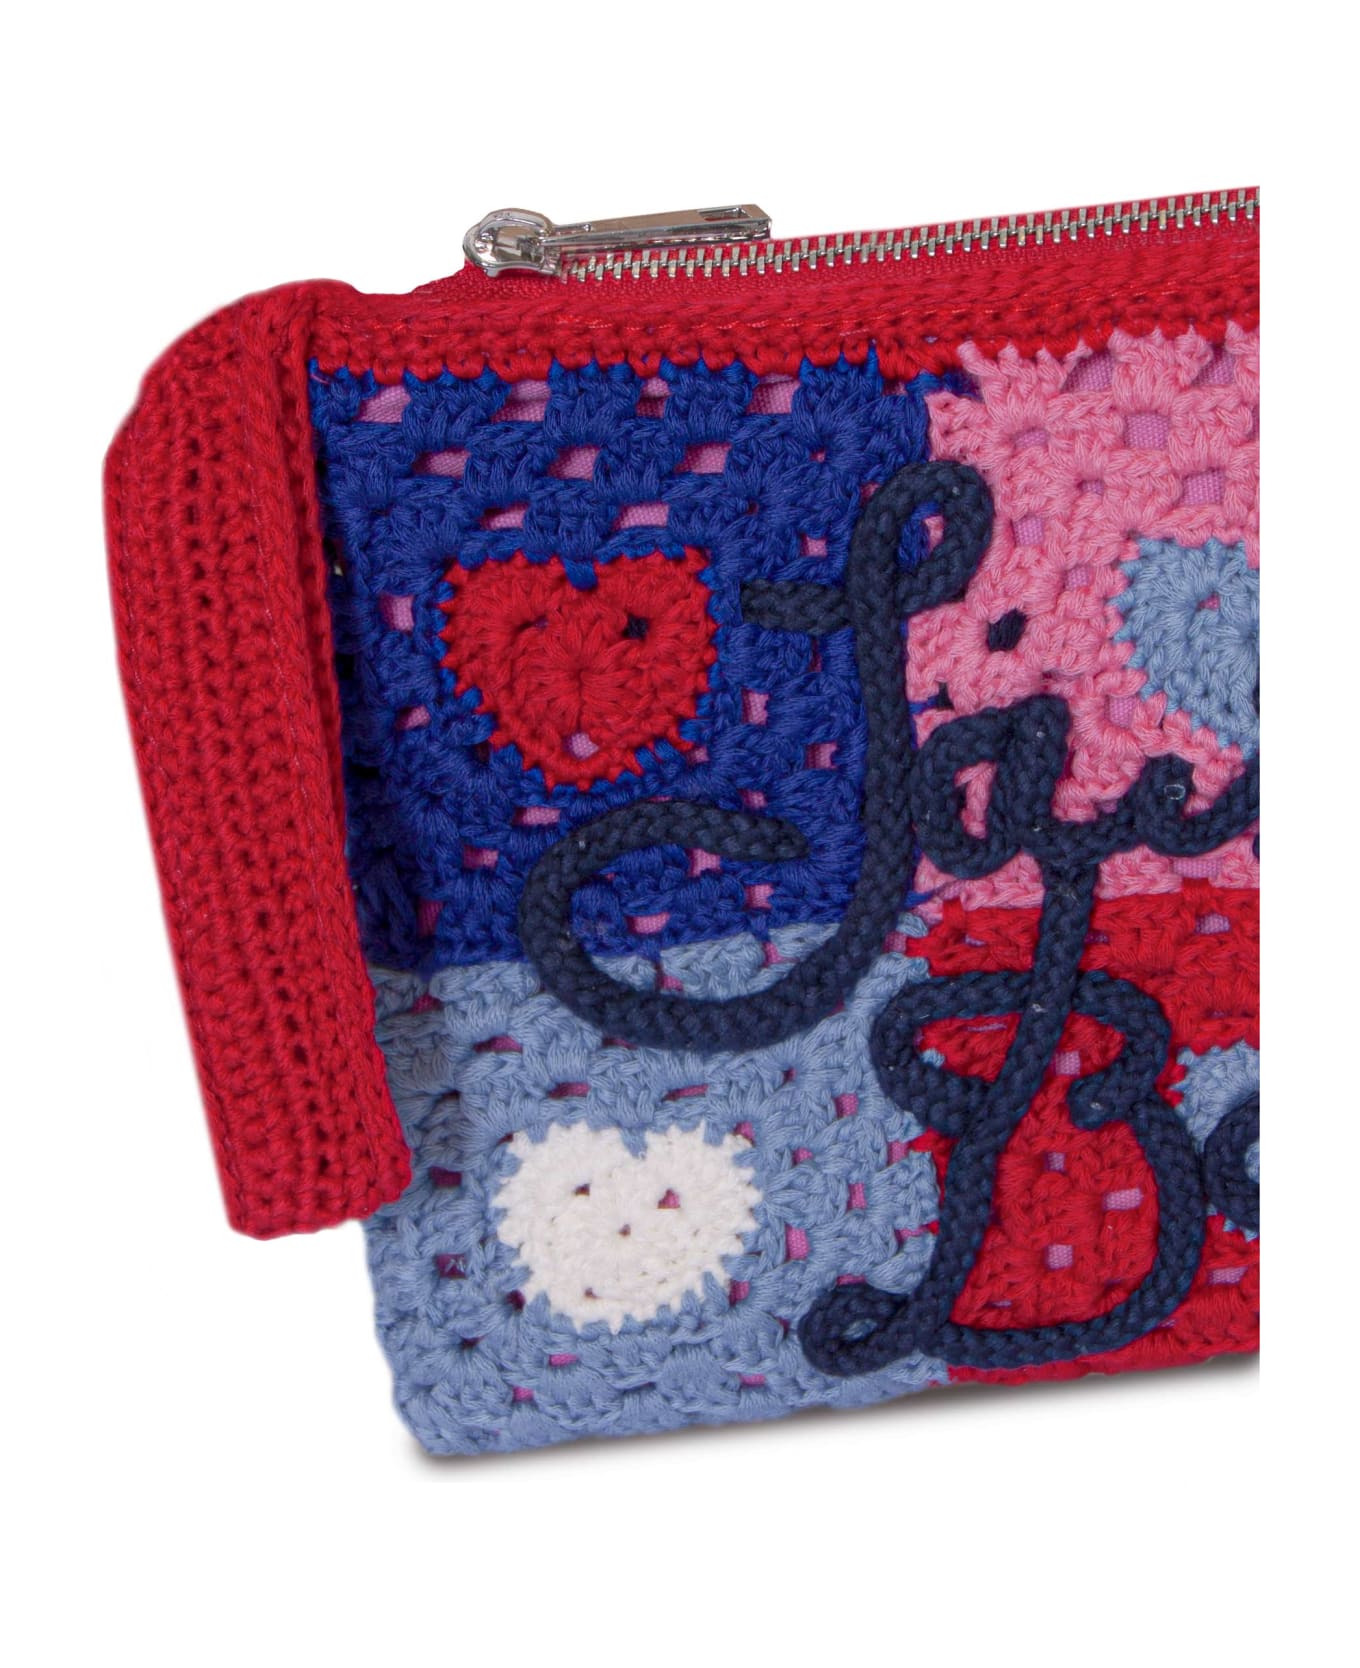 MC2 Saint Barth Parisienne Crochet Pochette With Heart Embroidery - RED